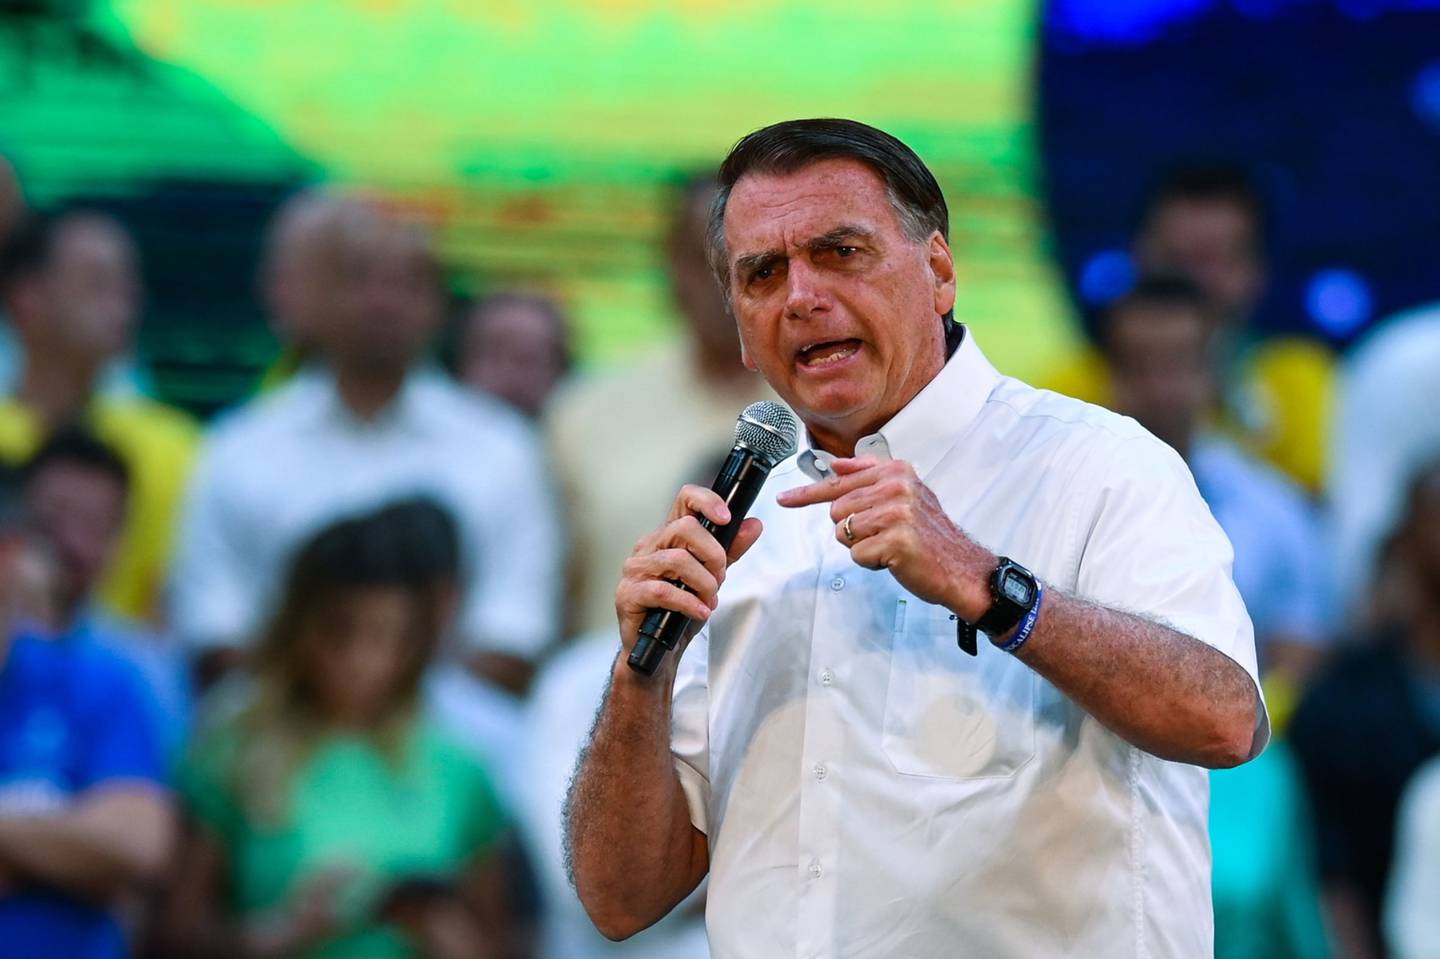 Brazilian President Jair Bolsonaro speaks during the National Convention to formalize his candidacy for a second term, at the Maracanazinho Gymnasium in Rio de Janeiro, on July 24, 2022. Bolsonaro officially kicked off his re-election campaign by rallying thousands of his supporters in Rio de Janeiro, after stepping up his attempts to discredit Brazil's voting system.dfd